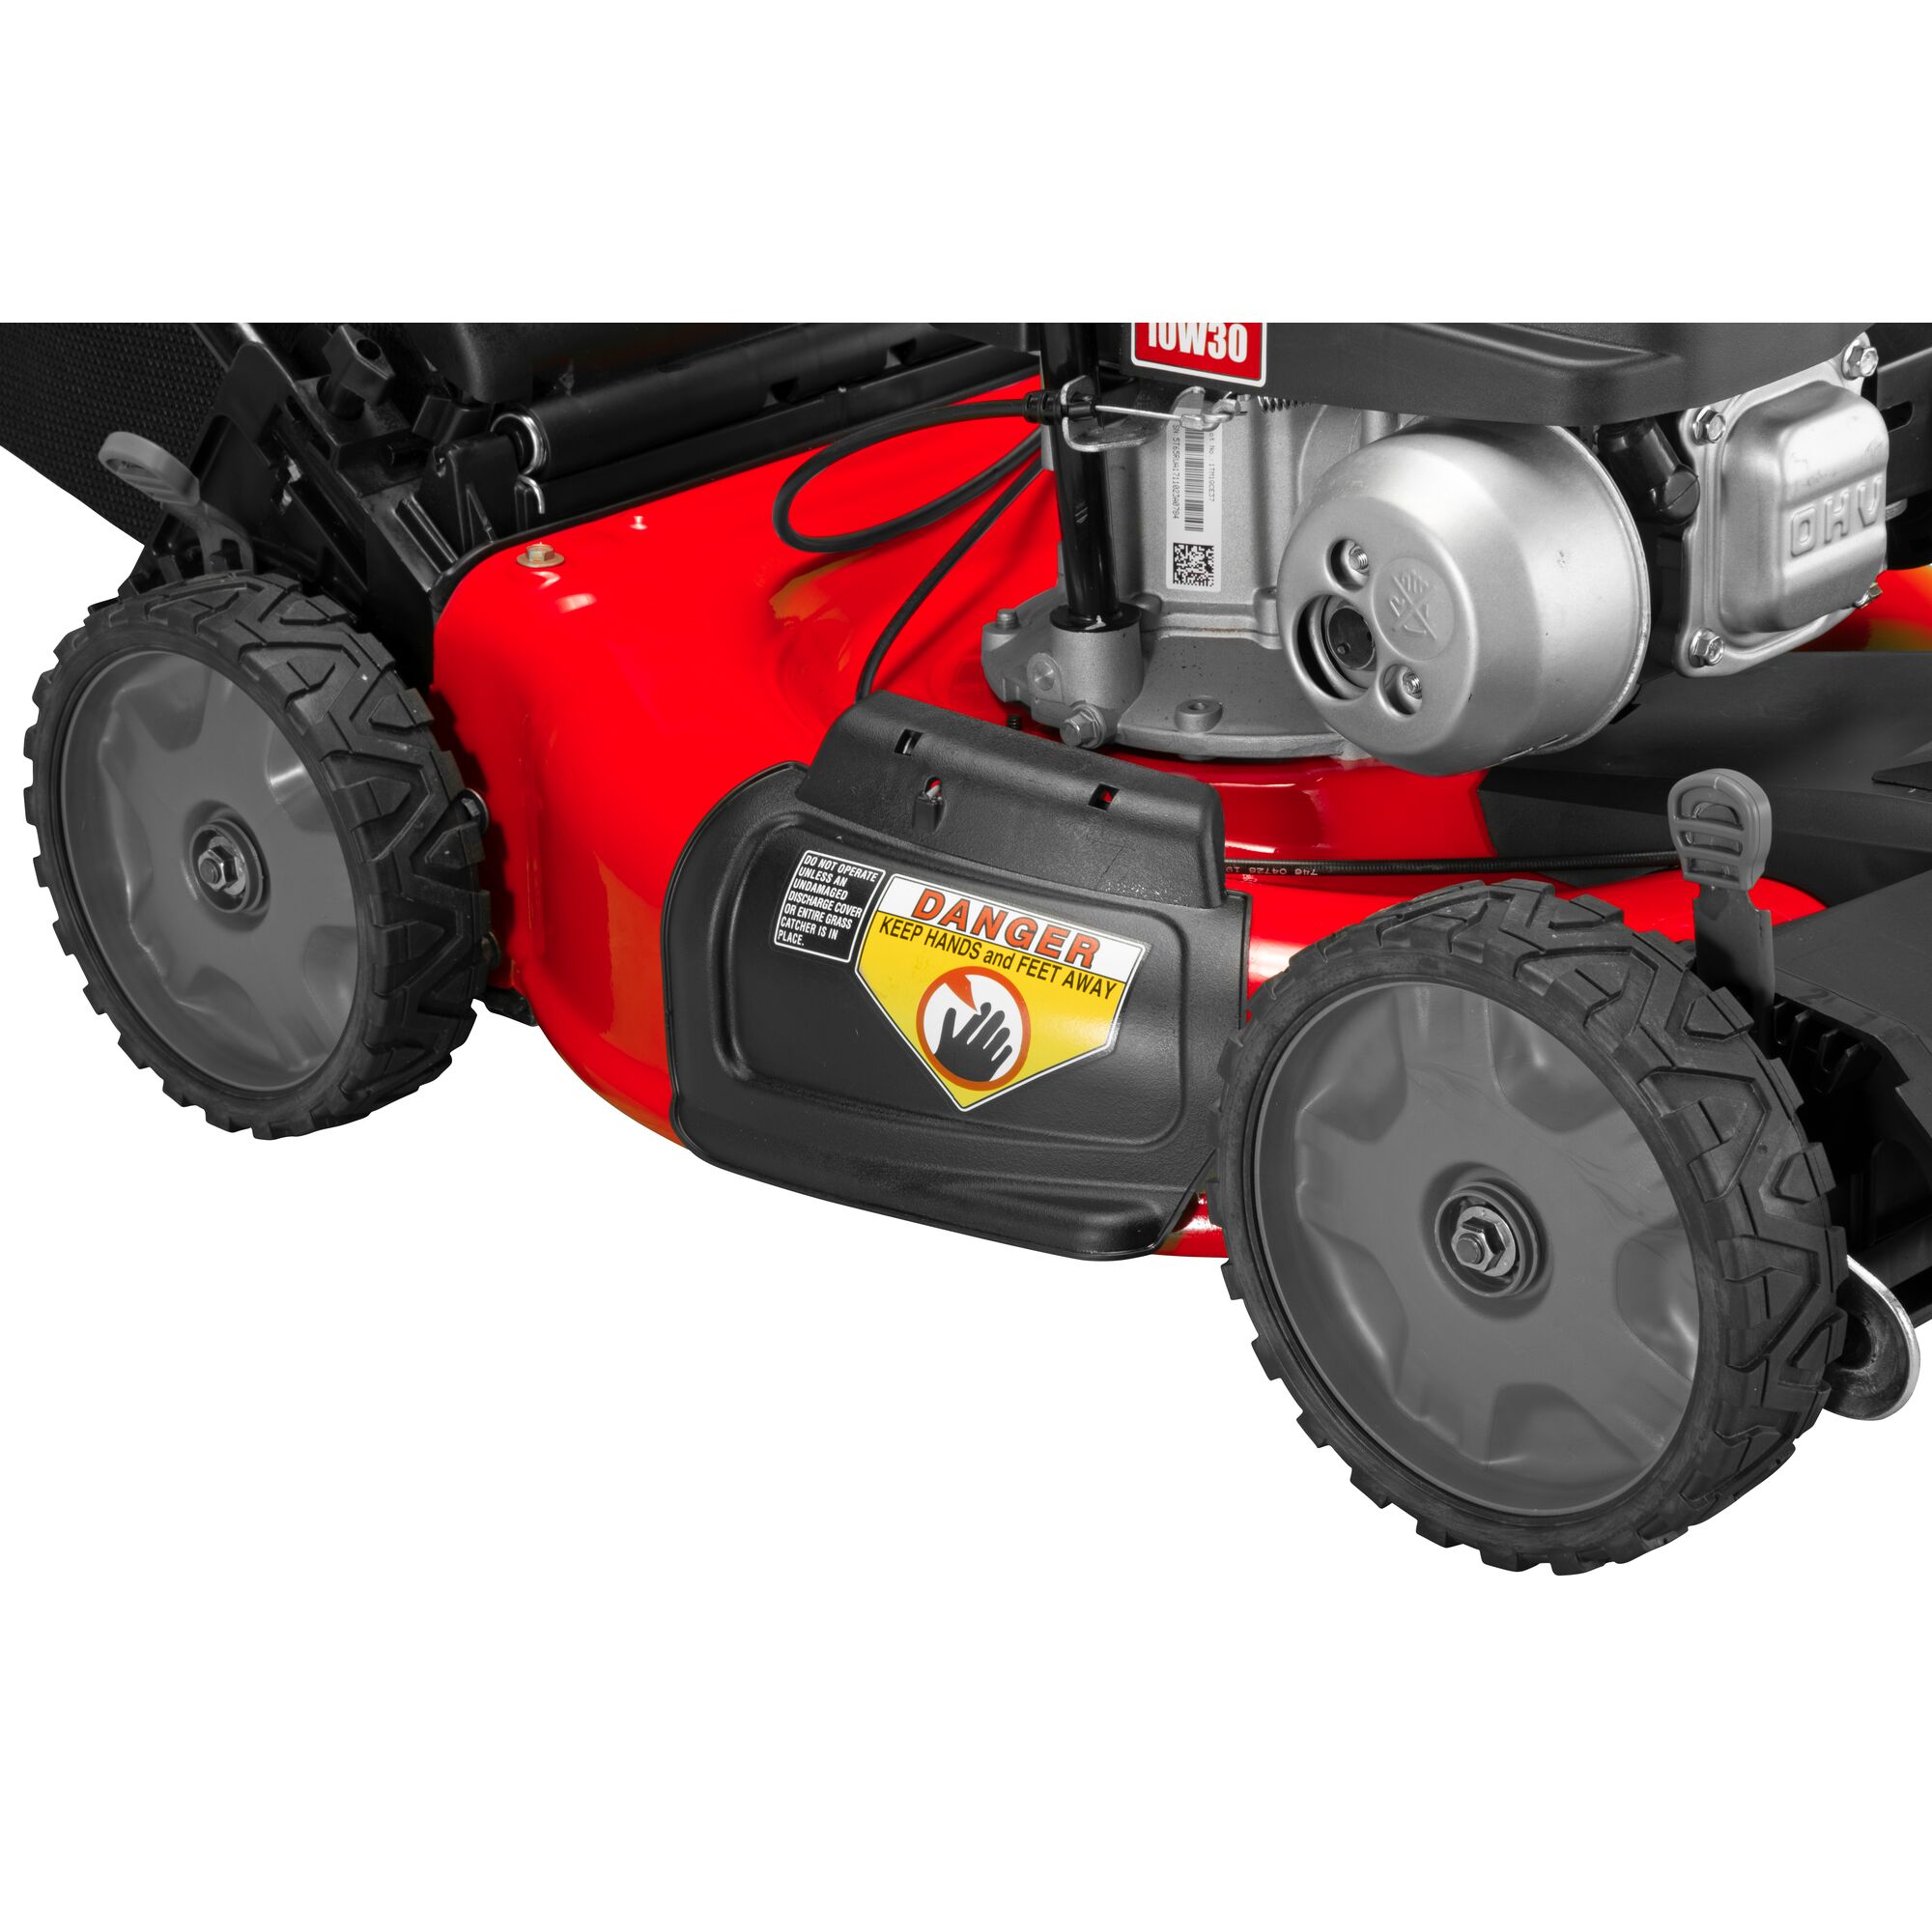 CRAFTSMAN M205 21 in. Front-Wheel-Drive Self-Propelled Lawn Mower on white background